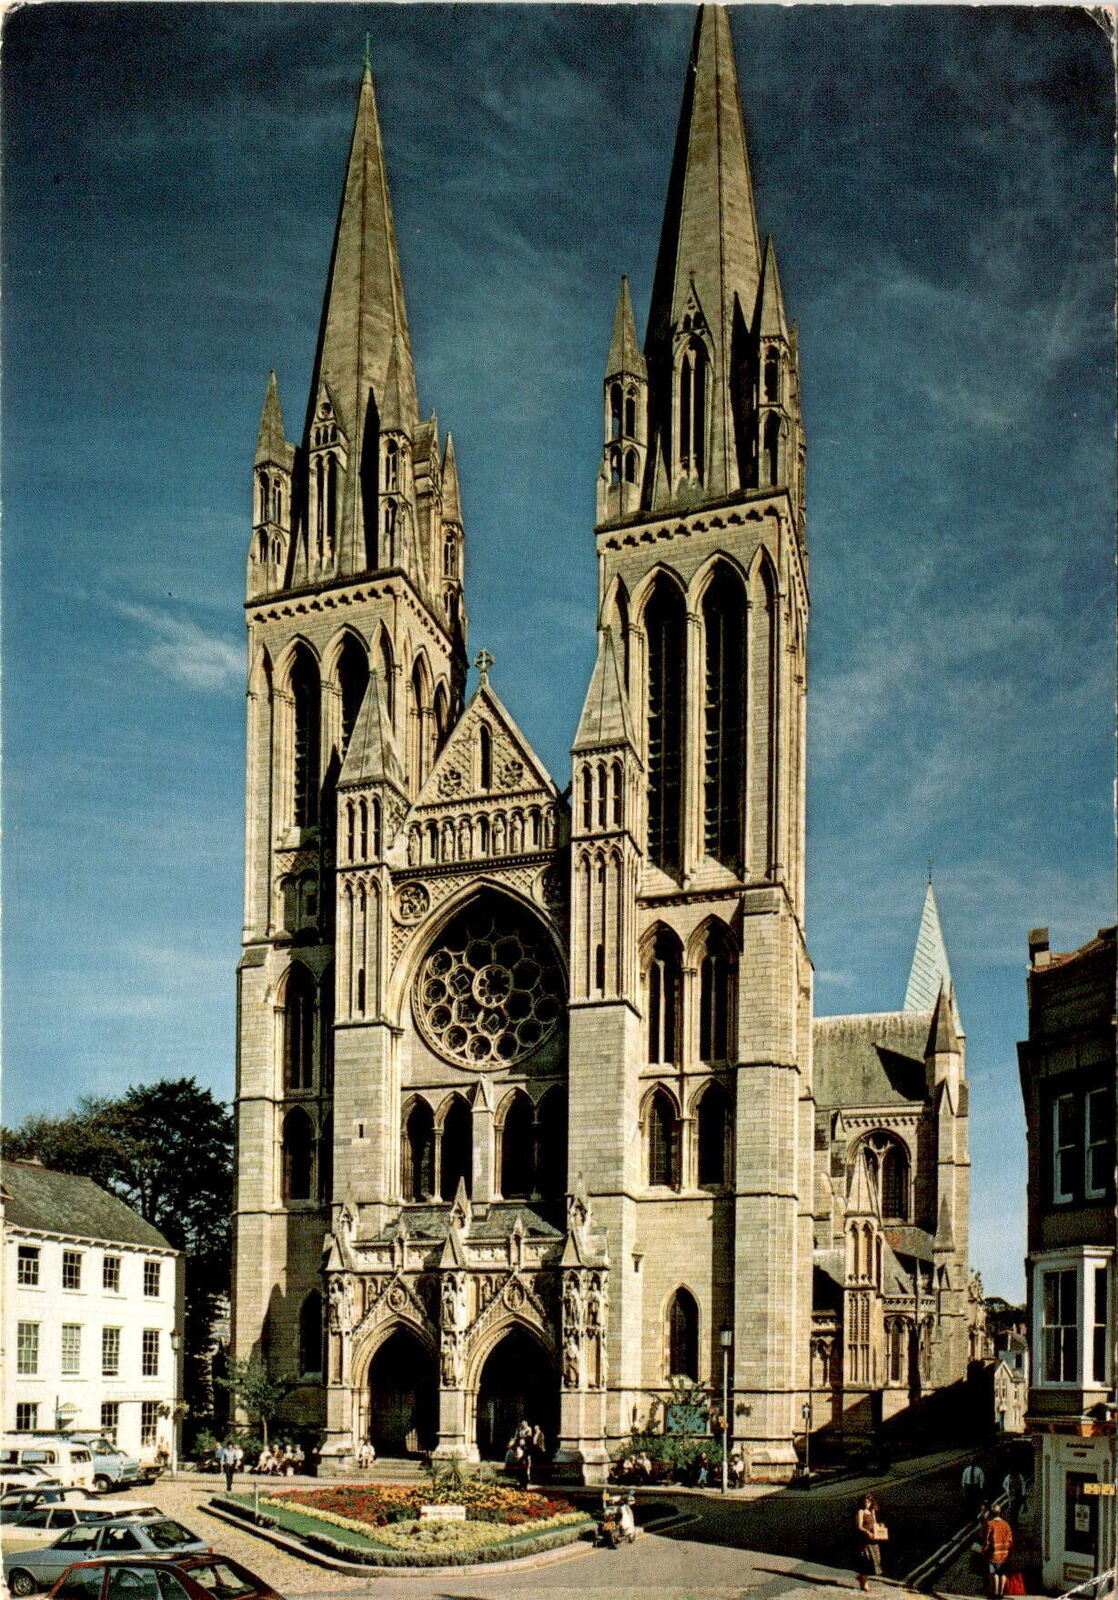 TRURO CATHEDRAL, High Cross, Judges Limited, Hastings, England Postcard